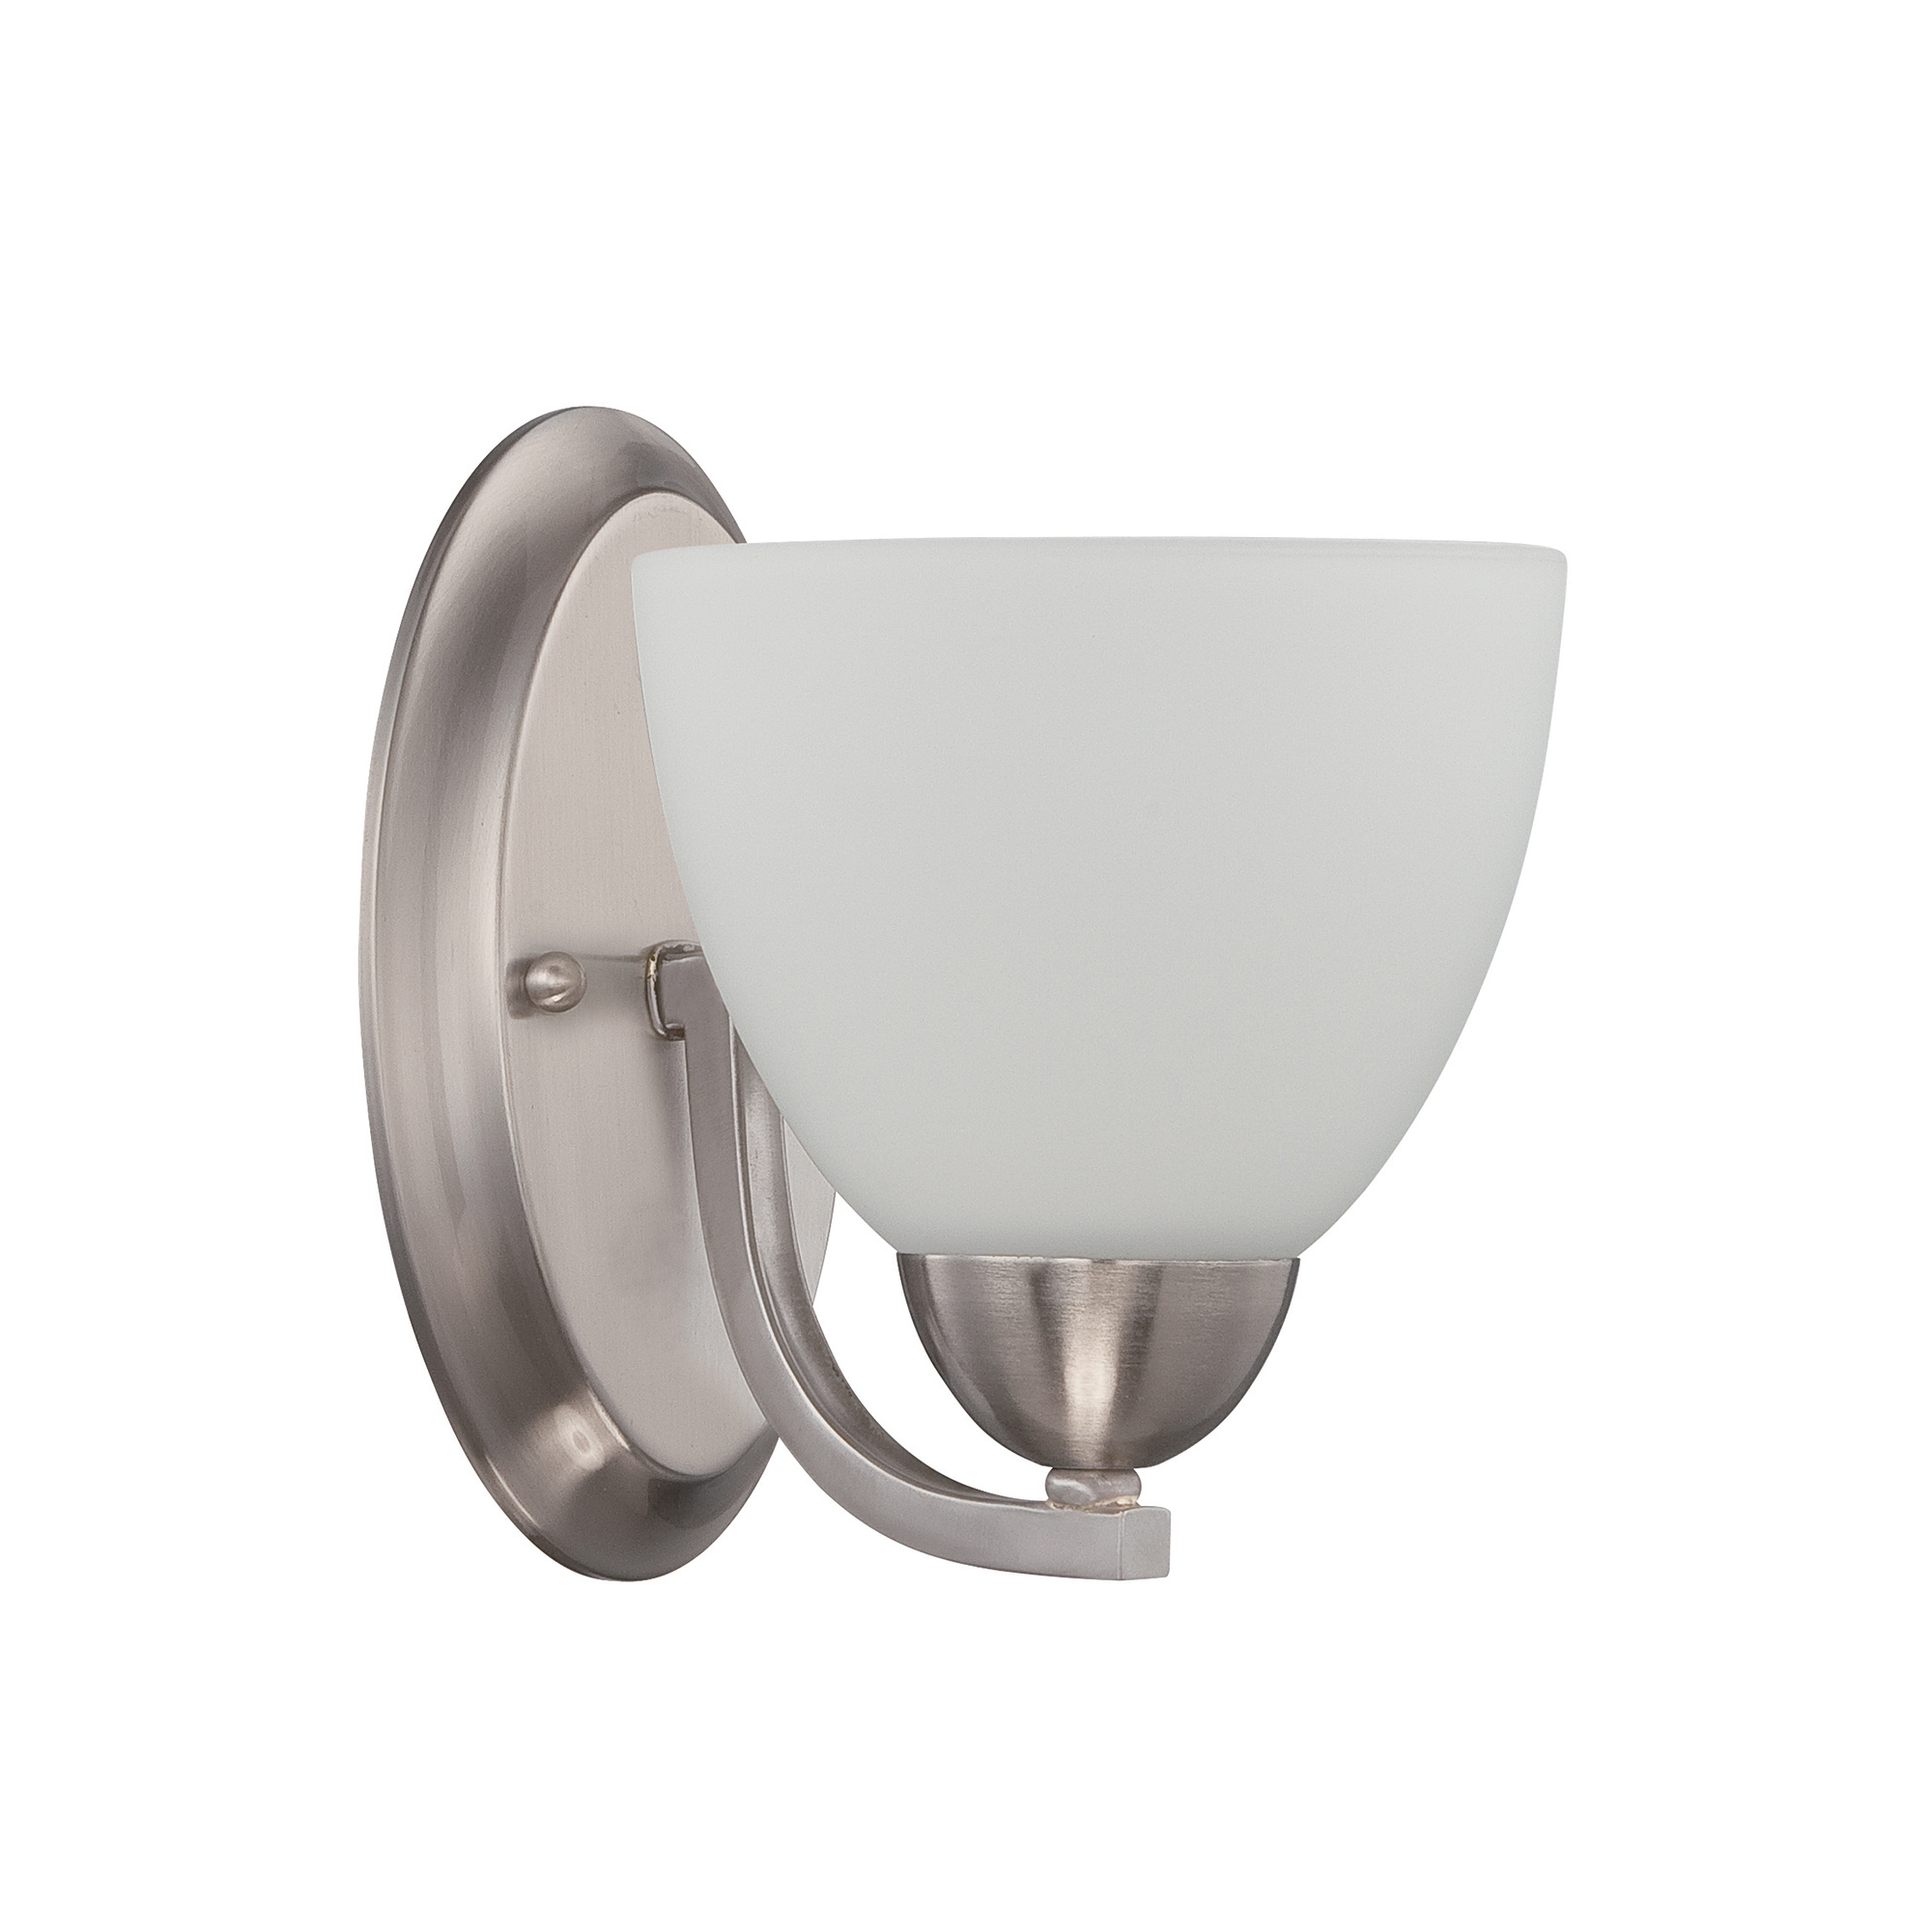 Sunset Lighting - One Light Preston Wall Sconce - in Bright Satin Nickel, Opal Etched Glass